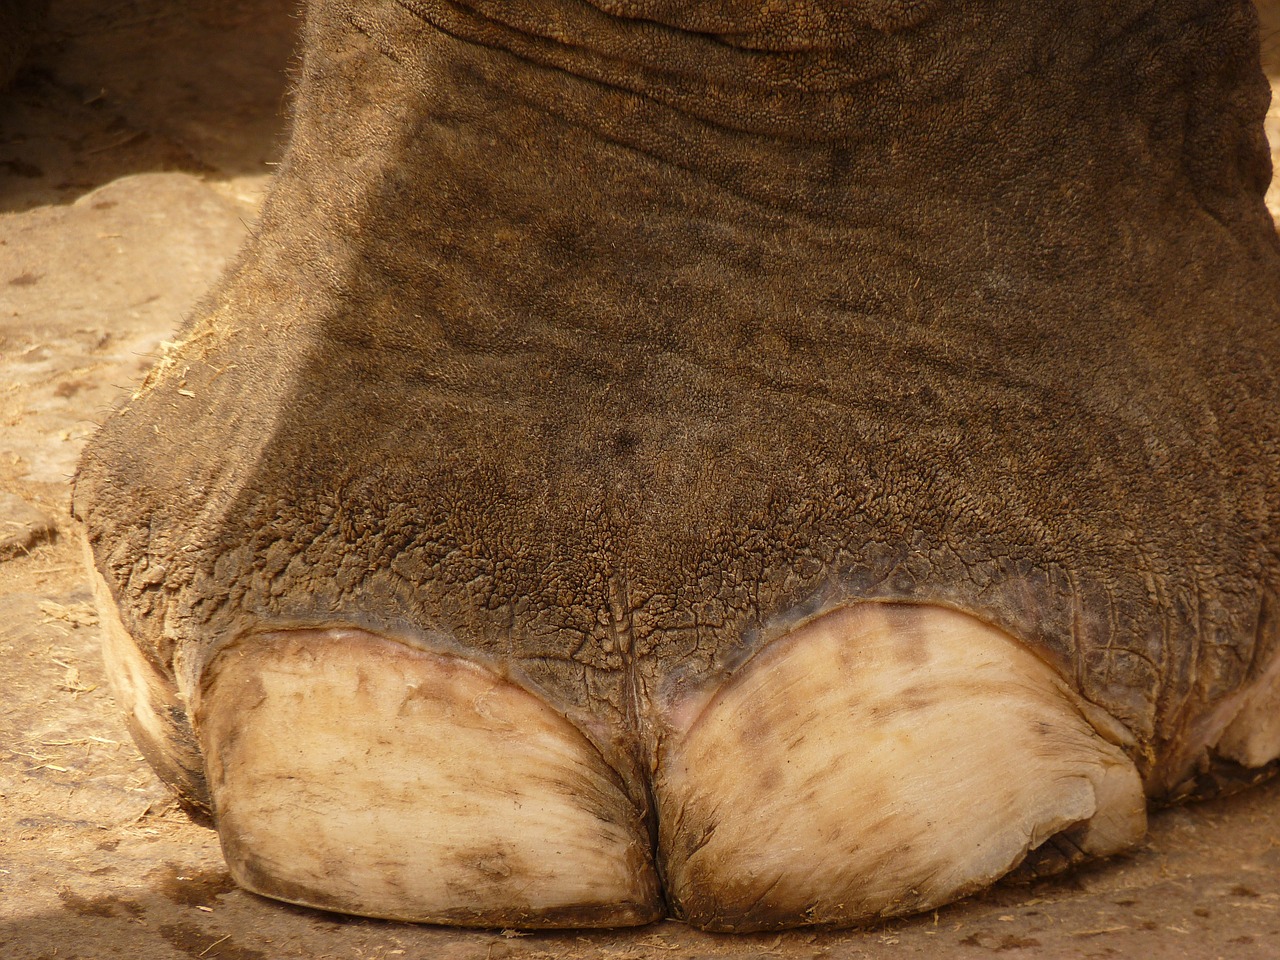 elephant,foot,ten,india,free pictures, free photos, free images, royalty free, free illustrations, public domain